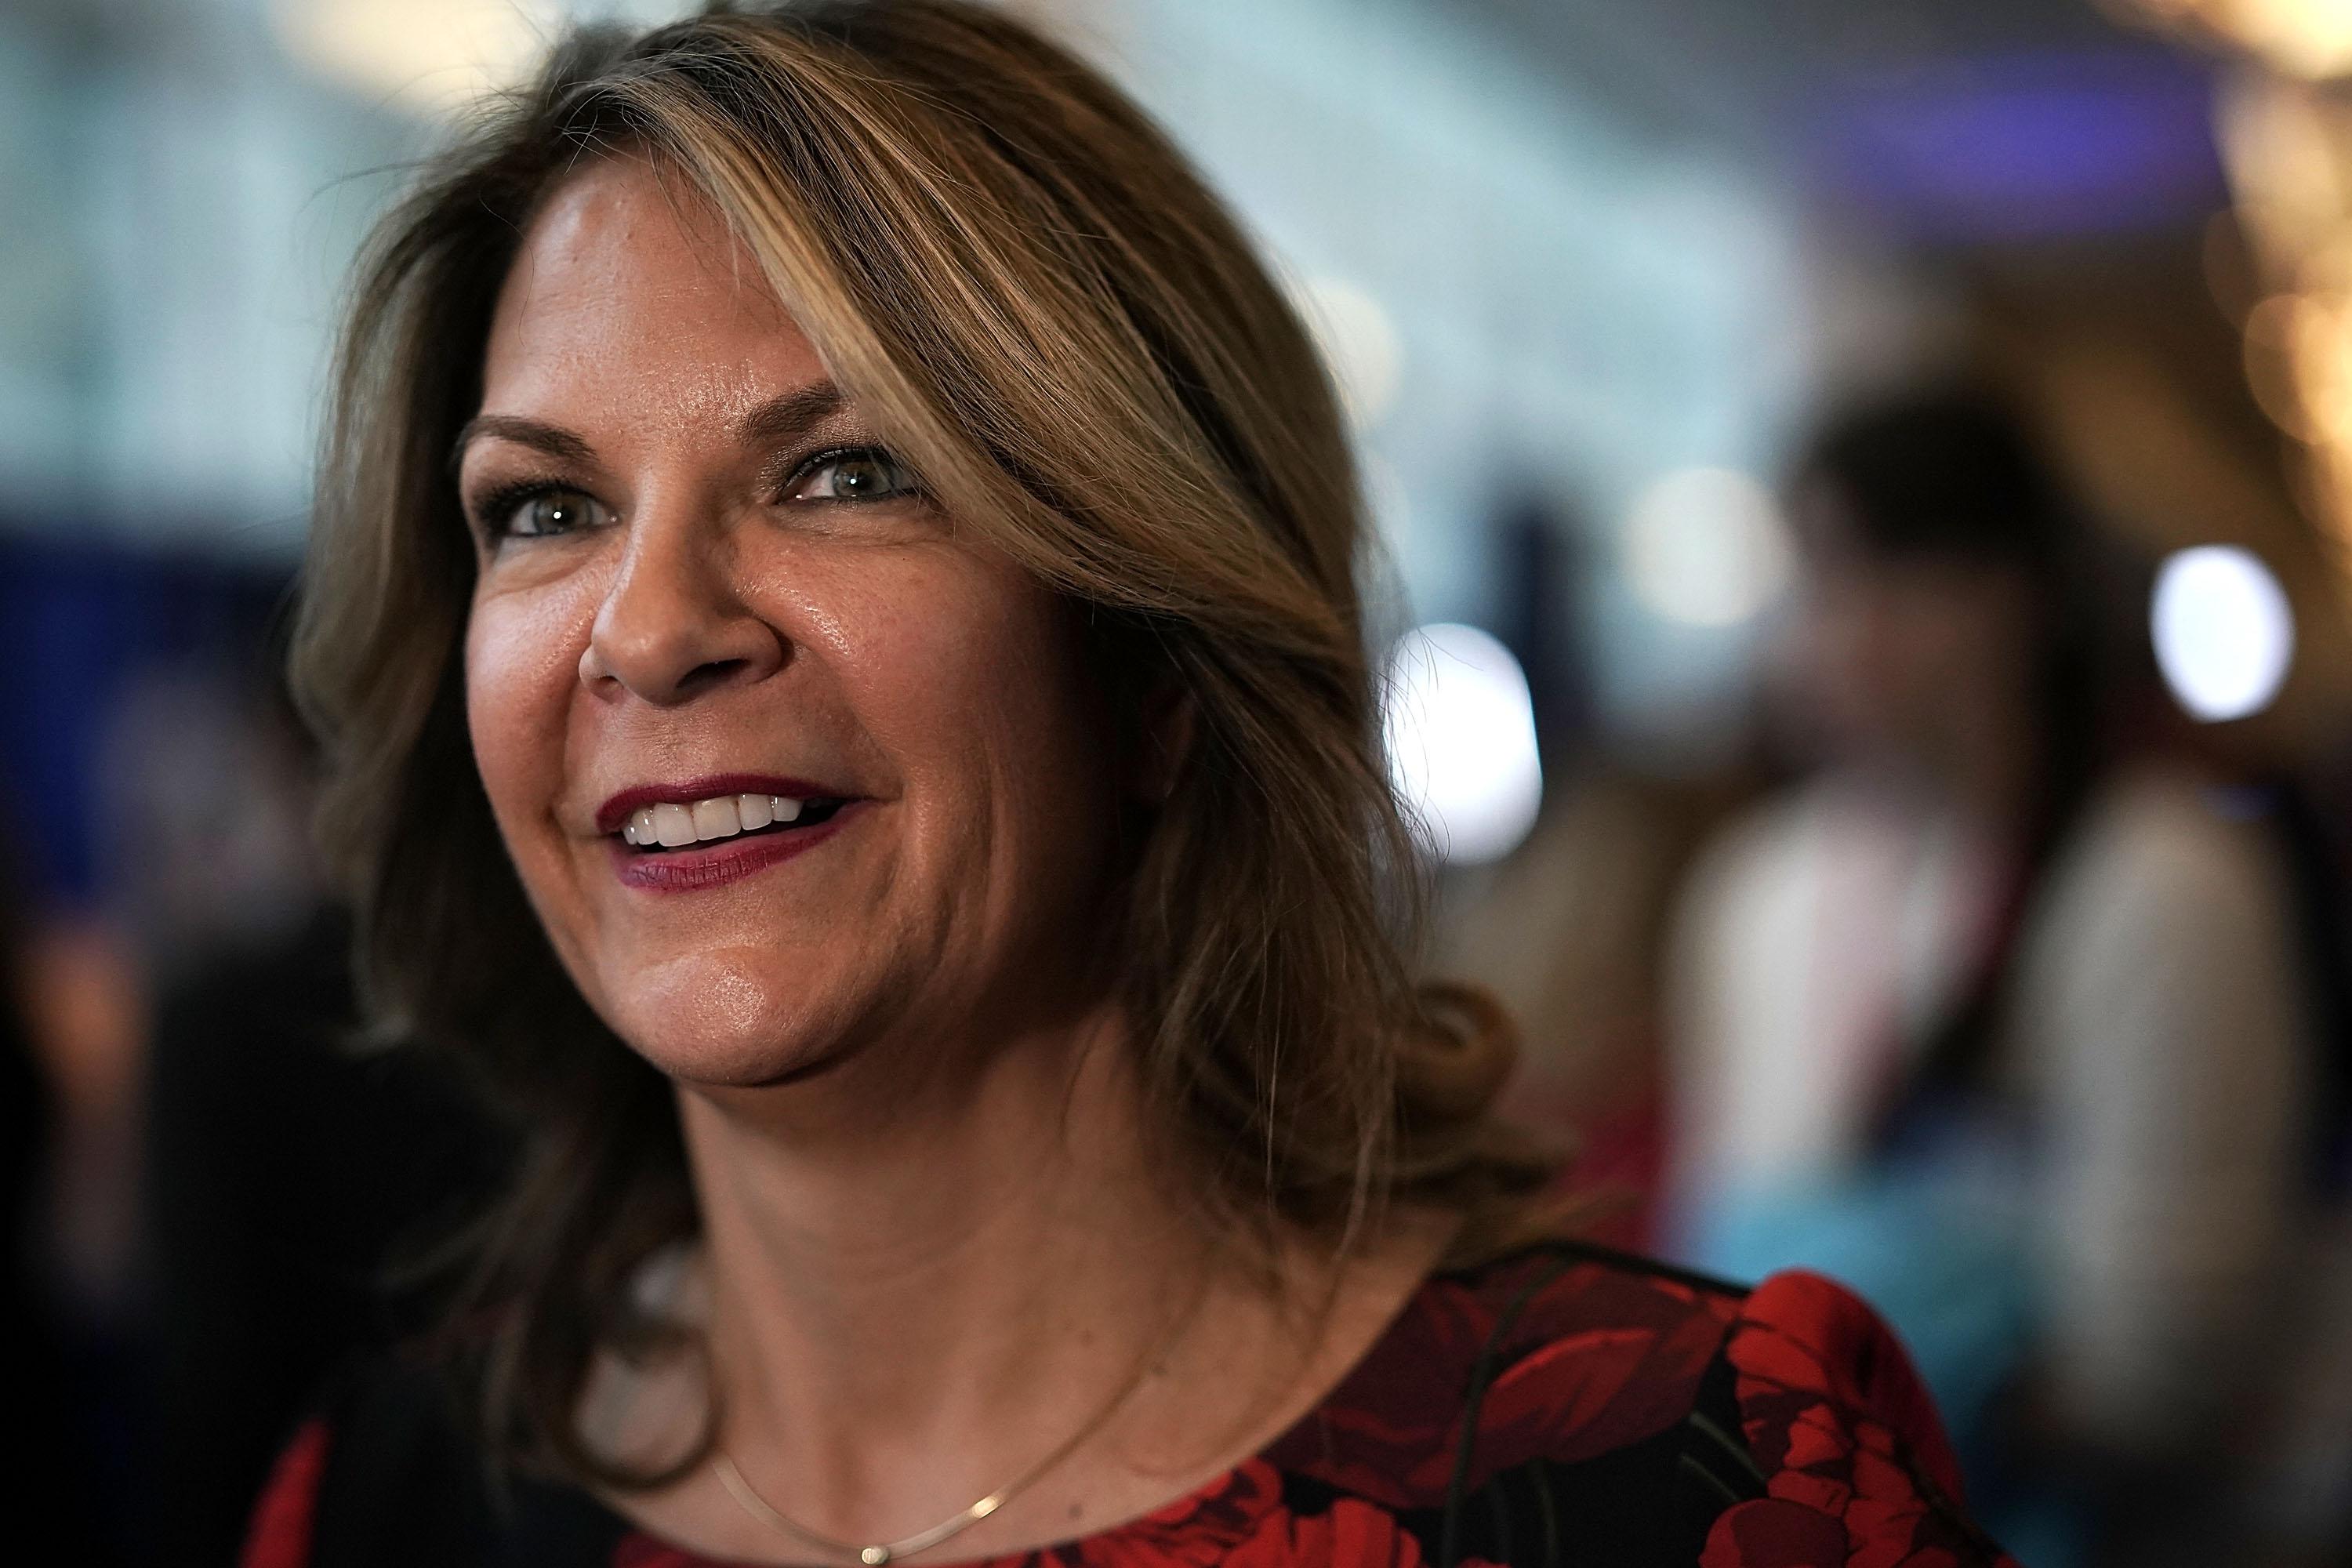 Kelli Ward shown attending CPAC 2018 in National Harbor, Maryland.